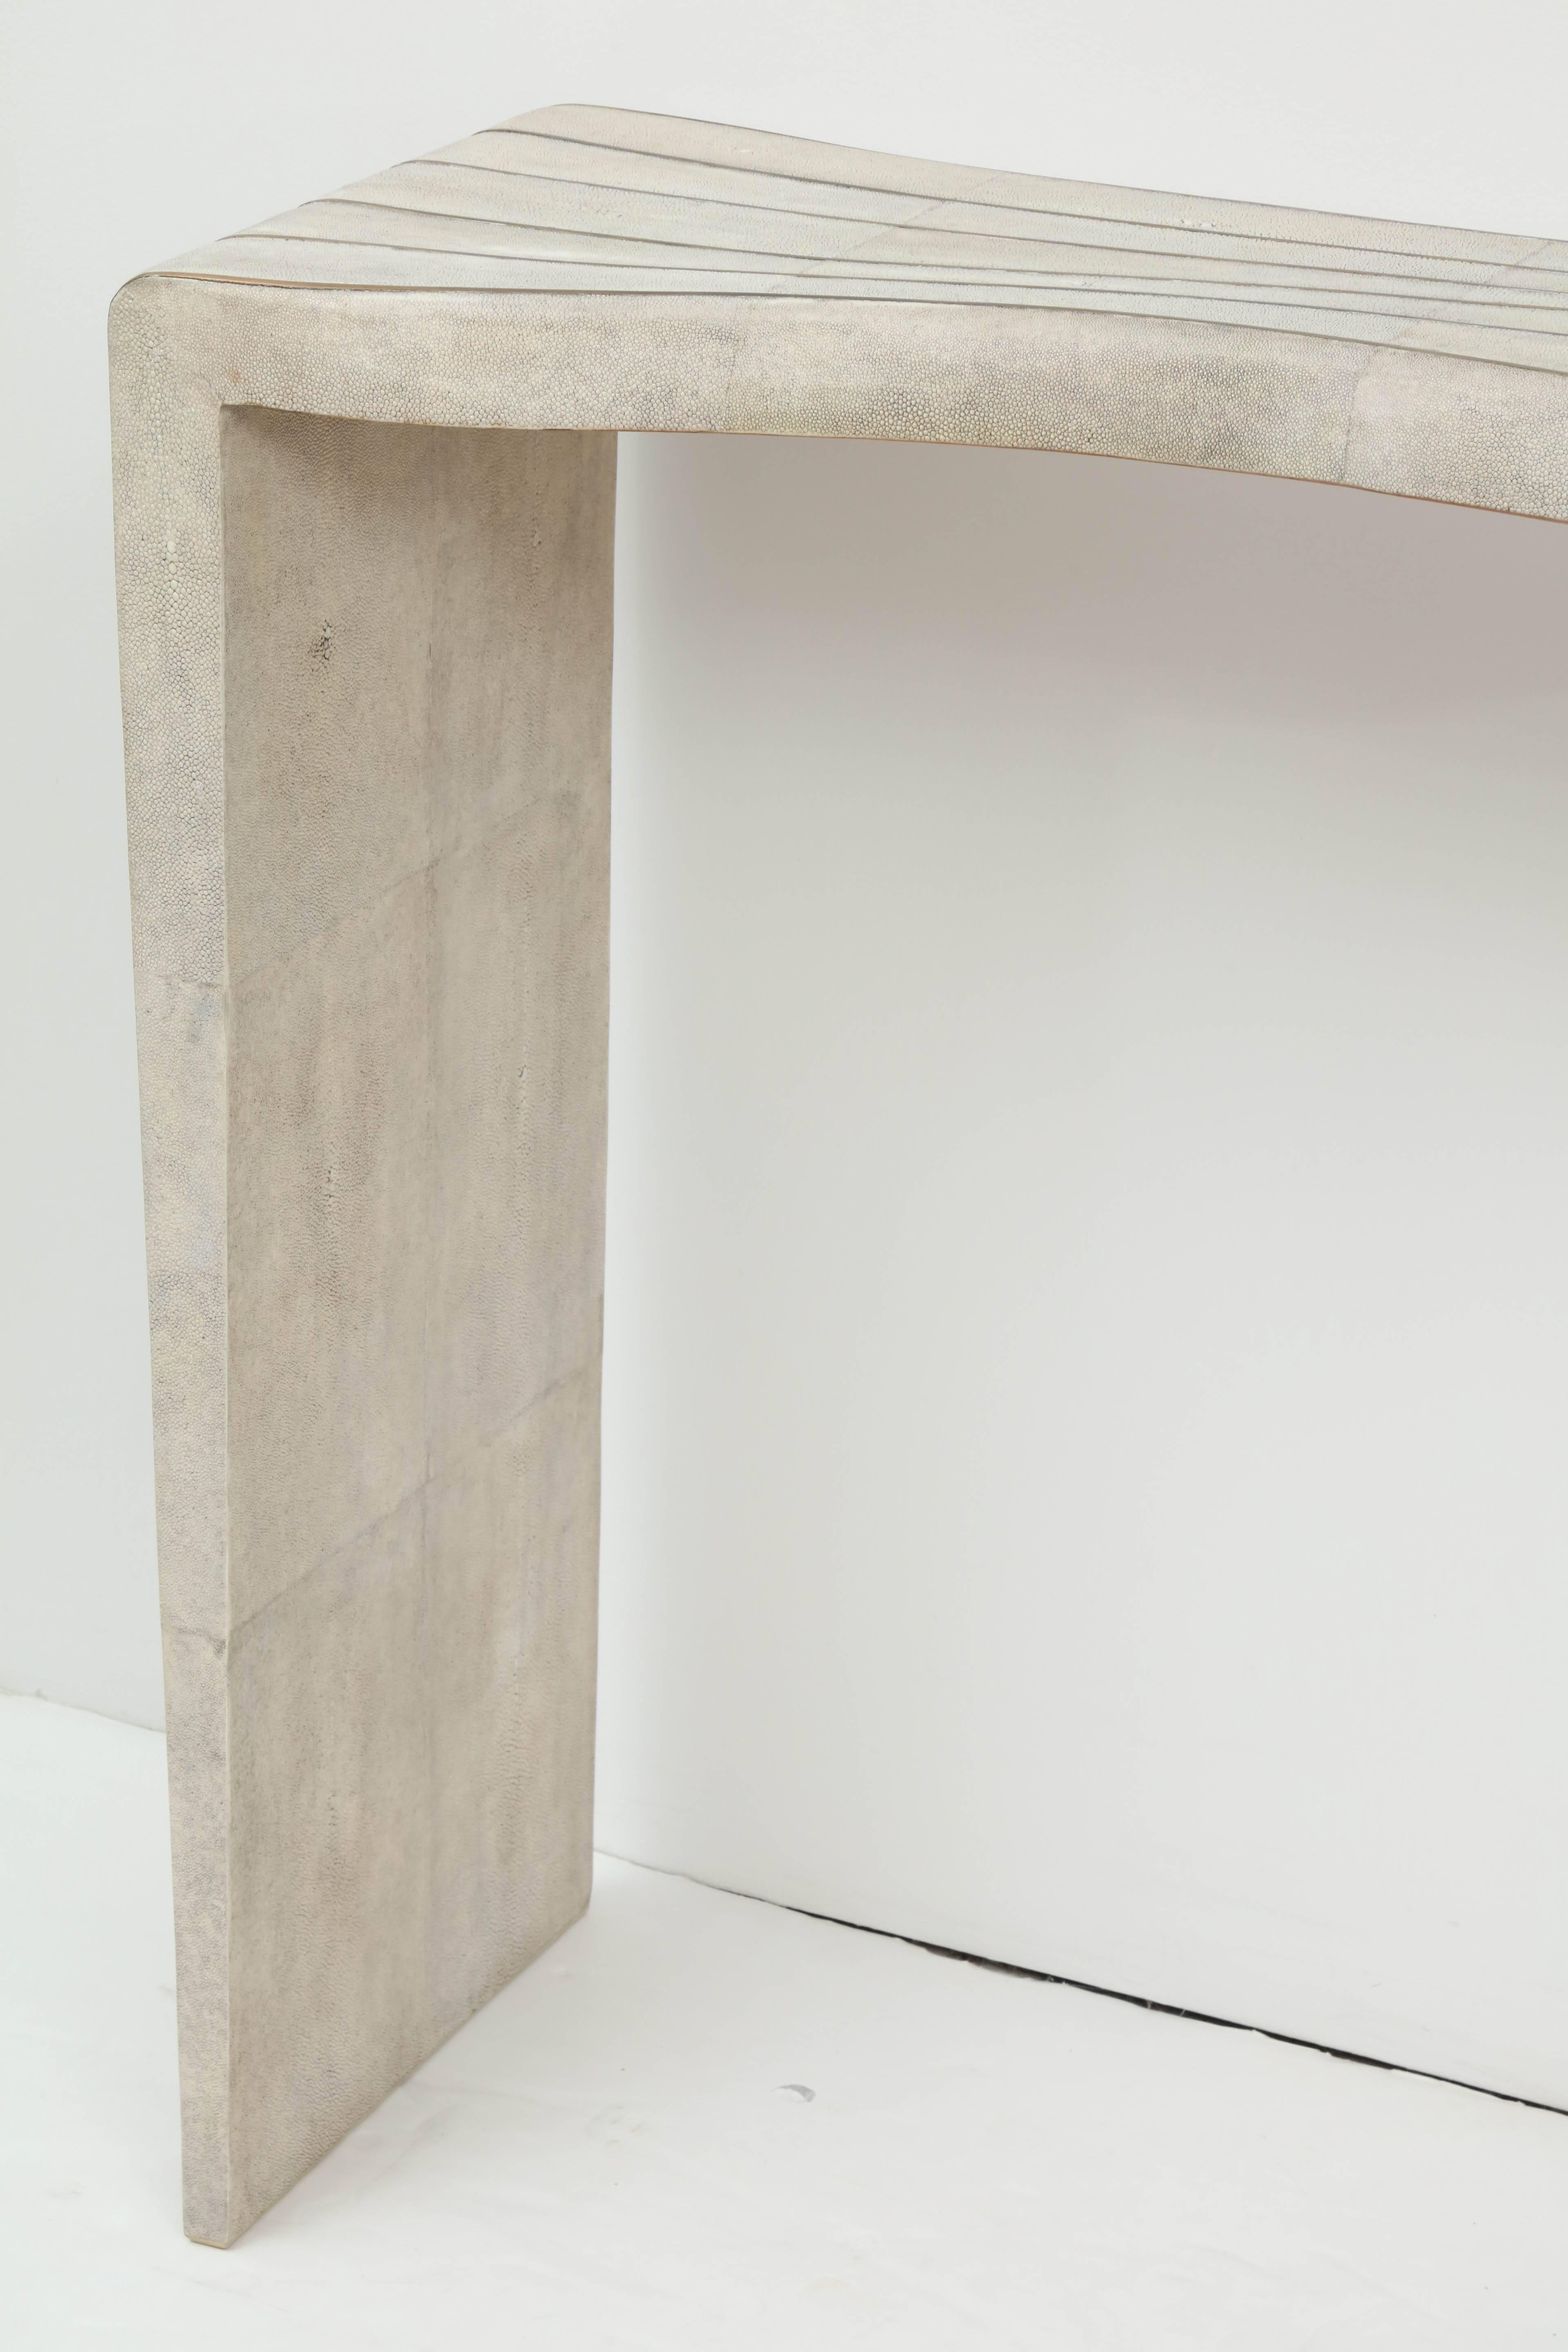 Hand-Crafted Shagreen Console with Brass Details, Cream Color, Contemporary, Organic Design